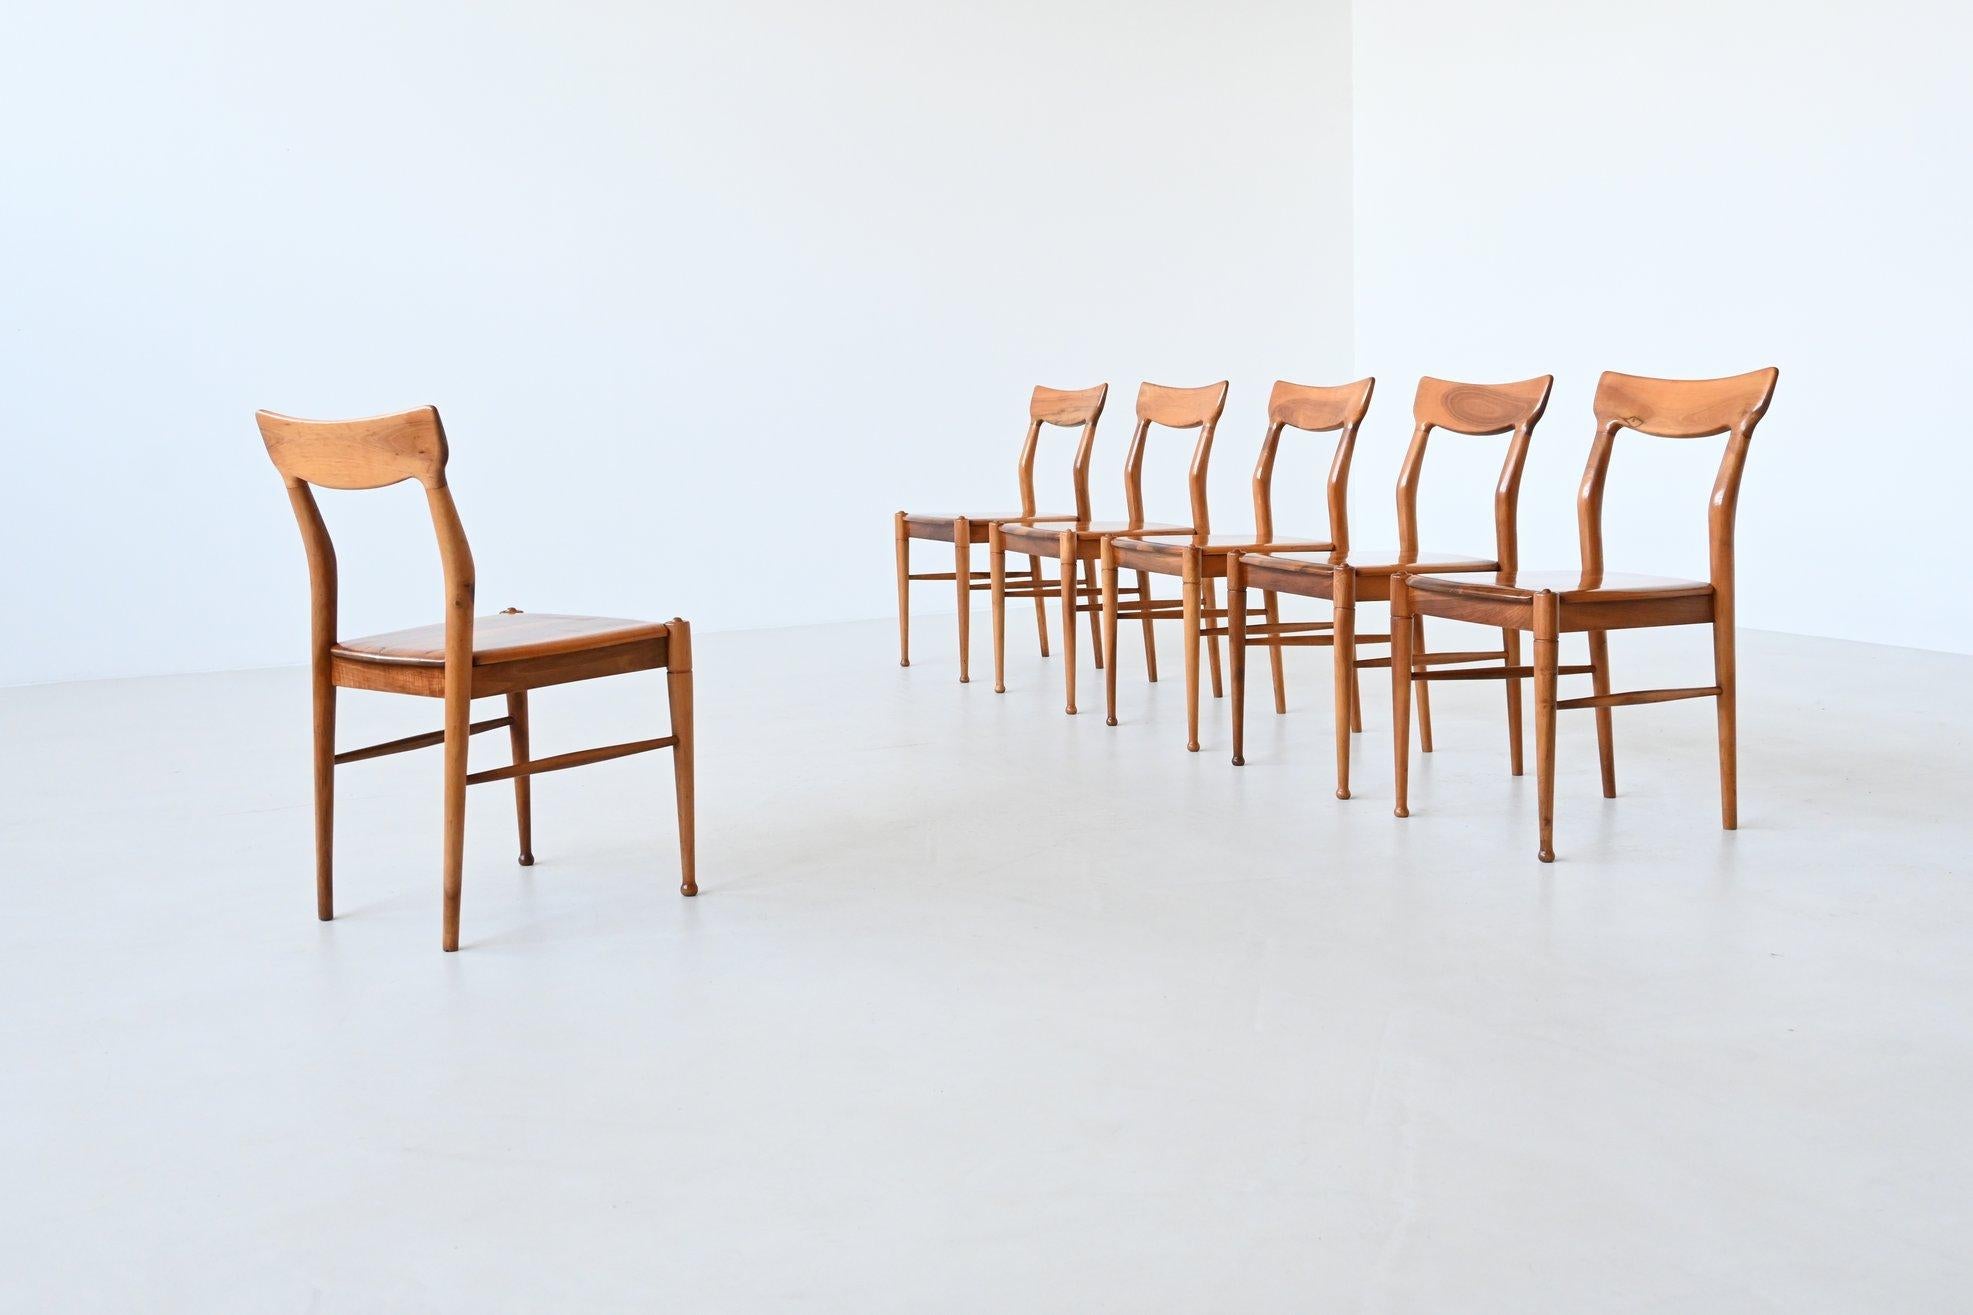 Fantastic and unique set of six dining chairs designed and manufactured by Bosteels Meubelen in Sint-Niklaas, Belgium 1960. These very nicely shaped chairs are made of beautifully grained solid walnut. They are sturdy and seat very comfortable. This